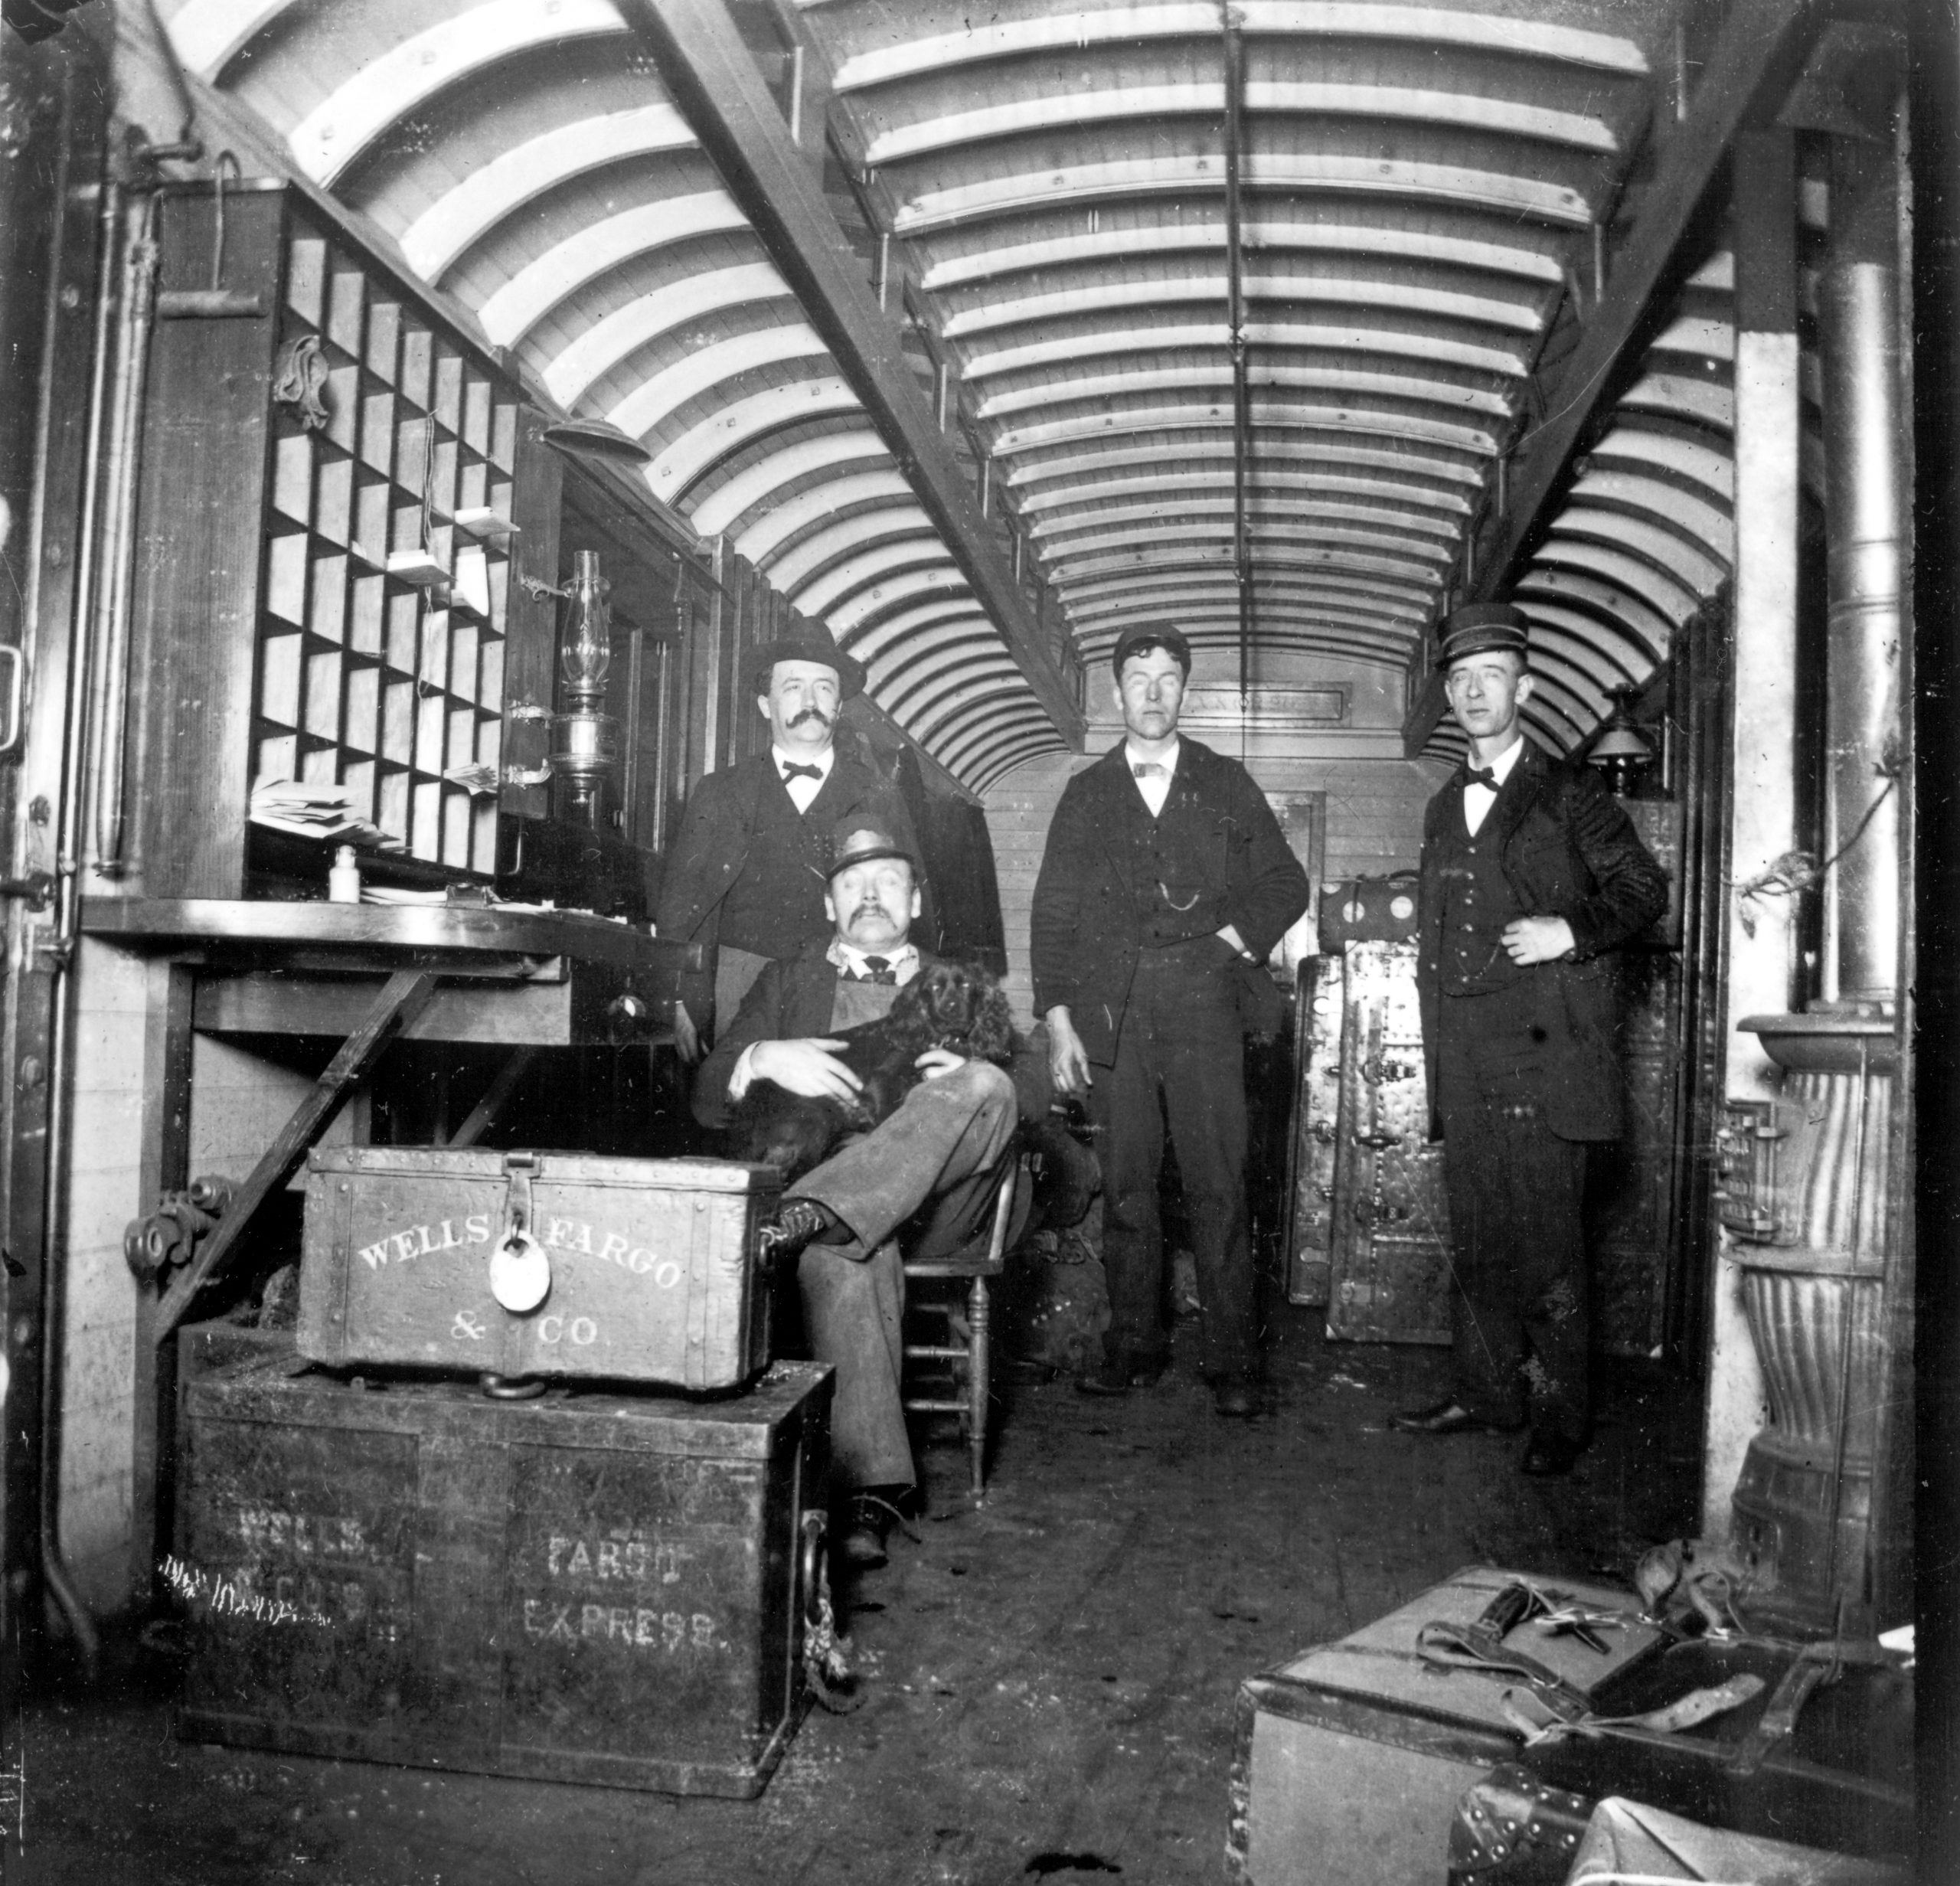 The interior of a wood railroad car shows three men standing and one sitting in chair with a small black dog on his lap. In the foreground are various trunks and locked boxes labeled Wells Fargo & Co.